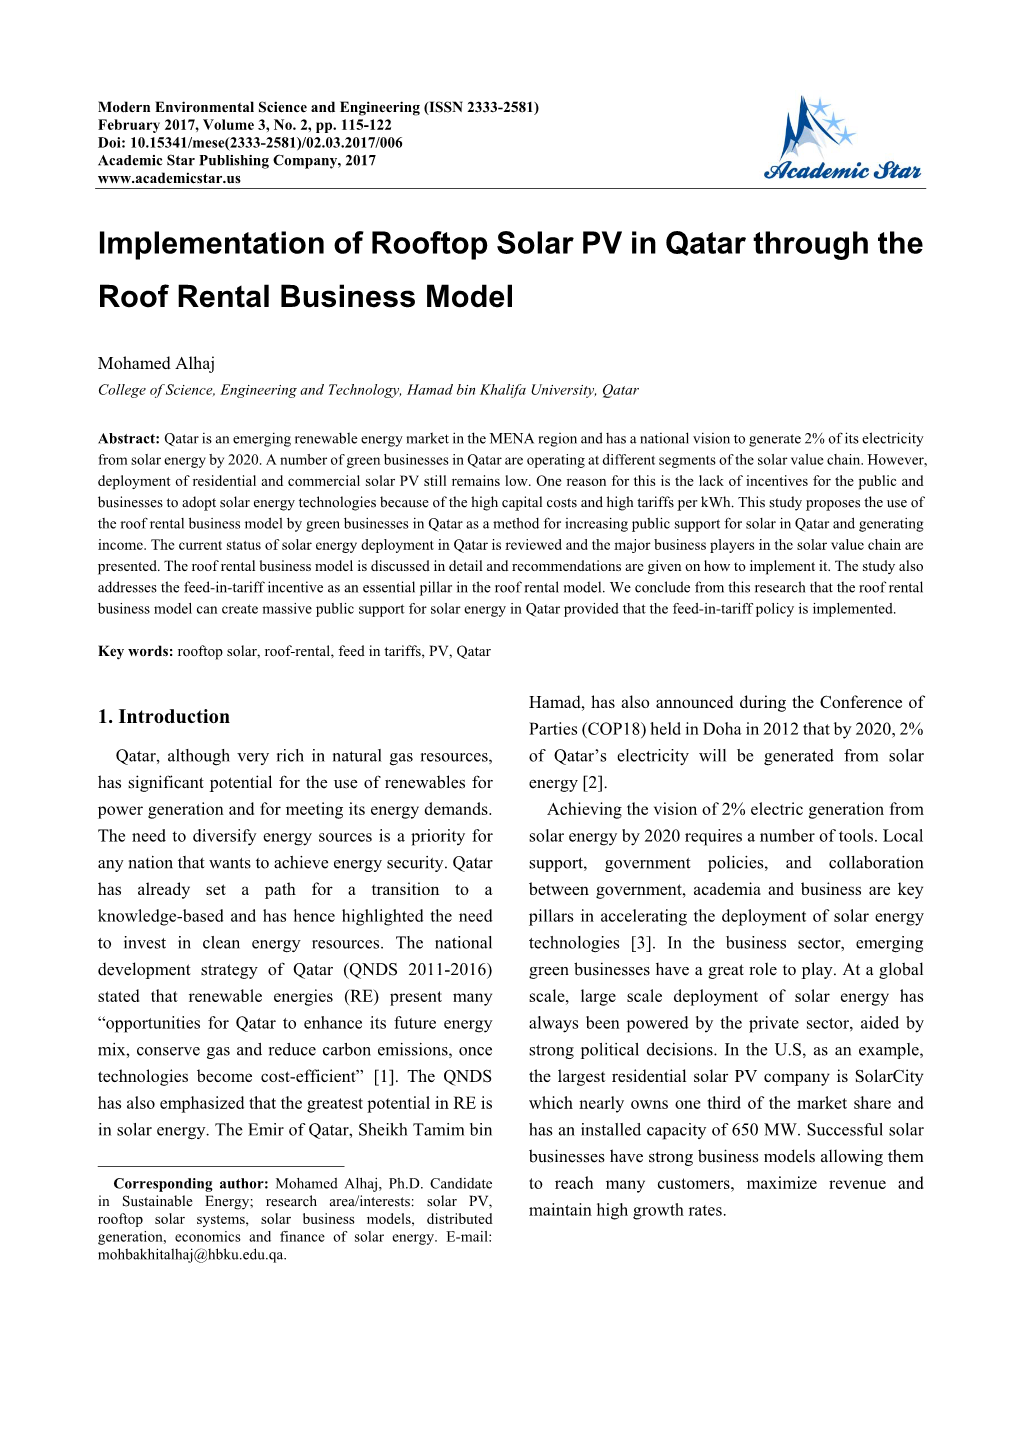 Implementation of Rooftop Solar PV in Qatar Through the Roof Rental Business Model